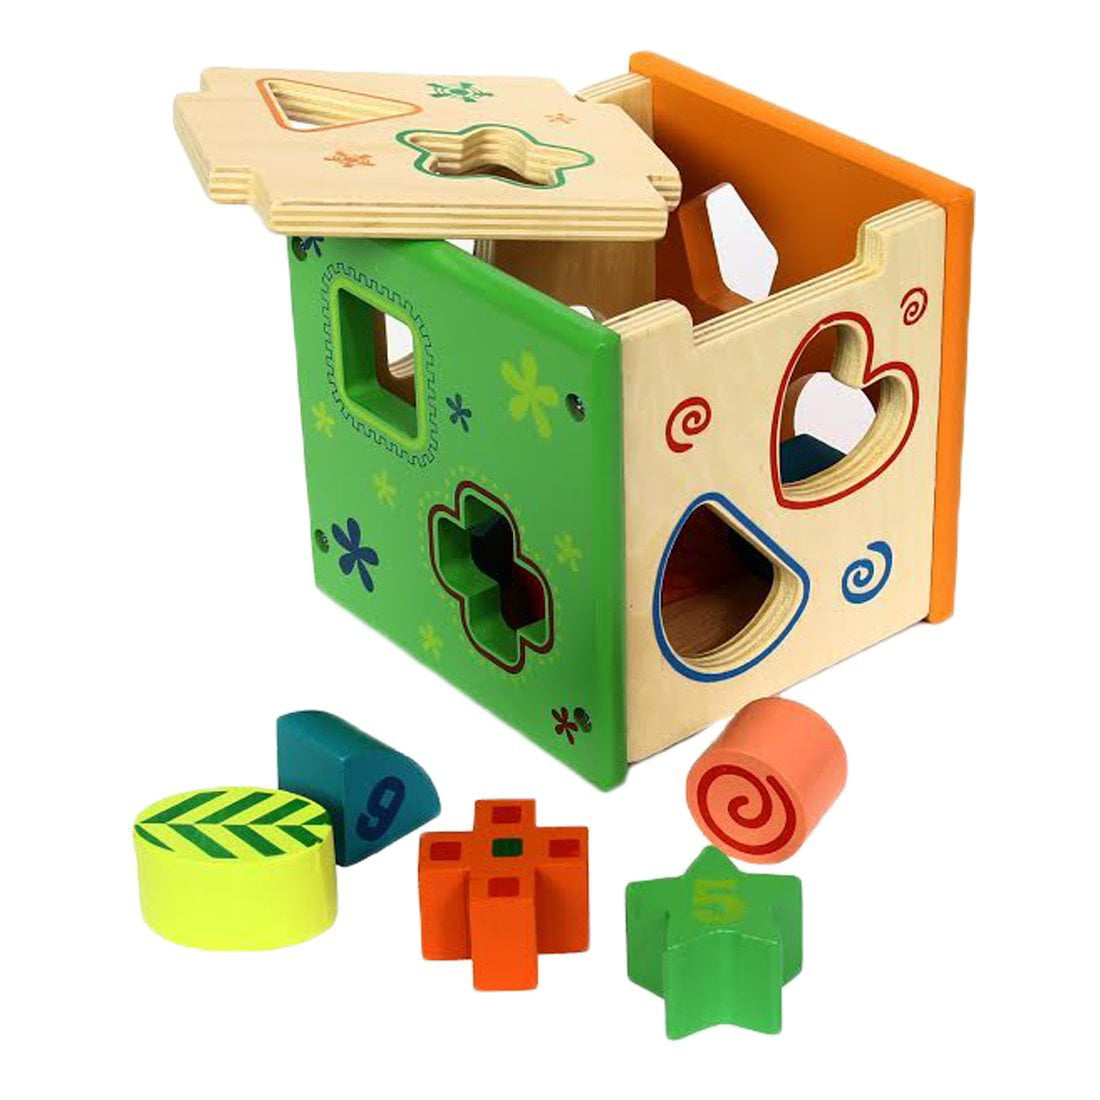 Dazzling Toys Wooden Shape Sorting Cube Educational Toy for Children 9 Geometric Shape Blocks Double-Sided Assorted Color Pieces with Number / Design